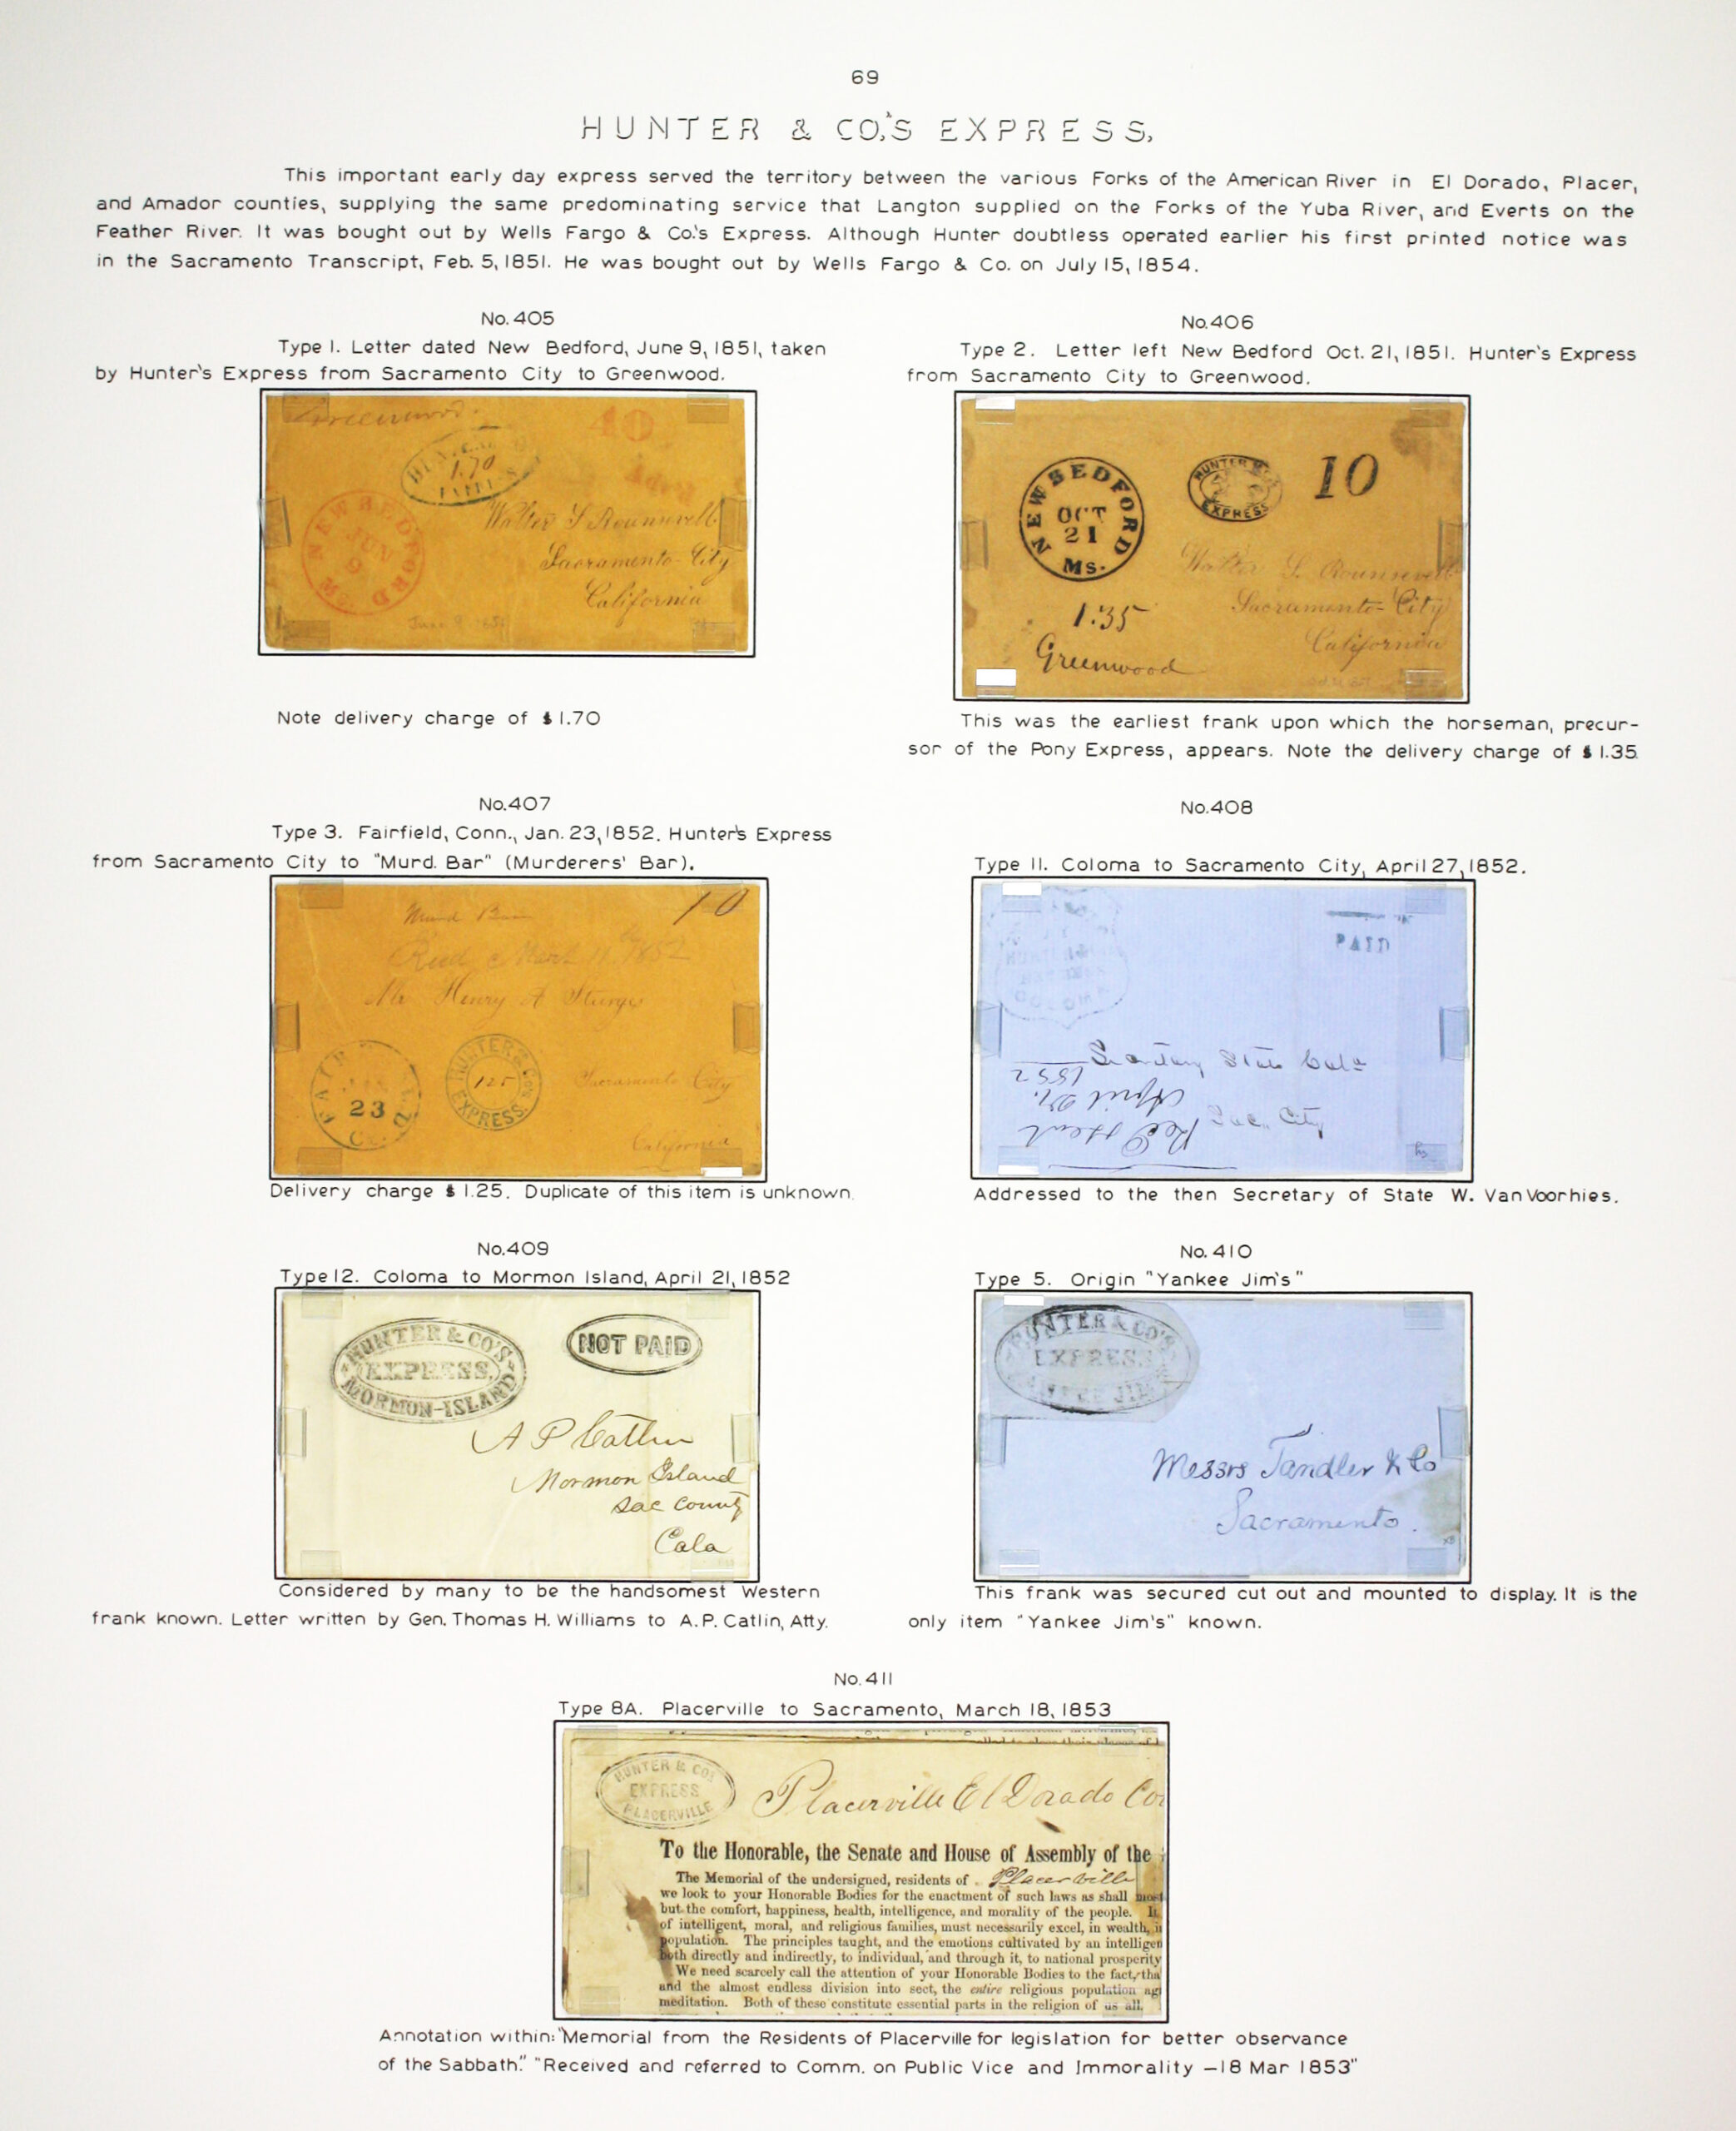 Historic exhibit Panel #69 featuring letter covers and a memorial to legislation. Long descriptions are available as page content. Image link will enlarge image.